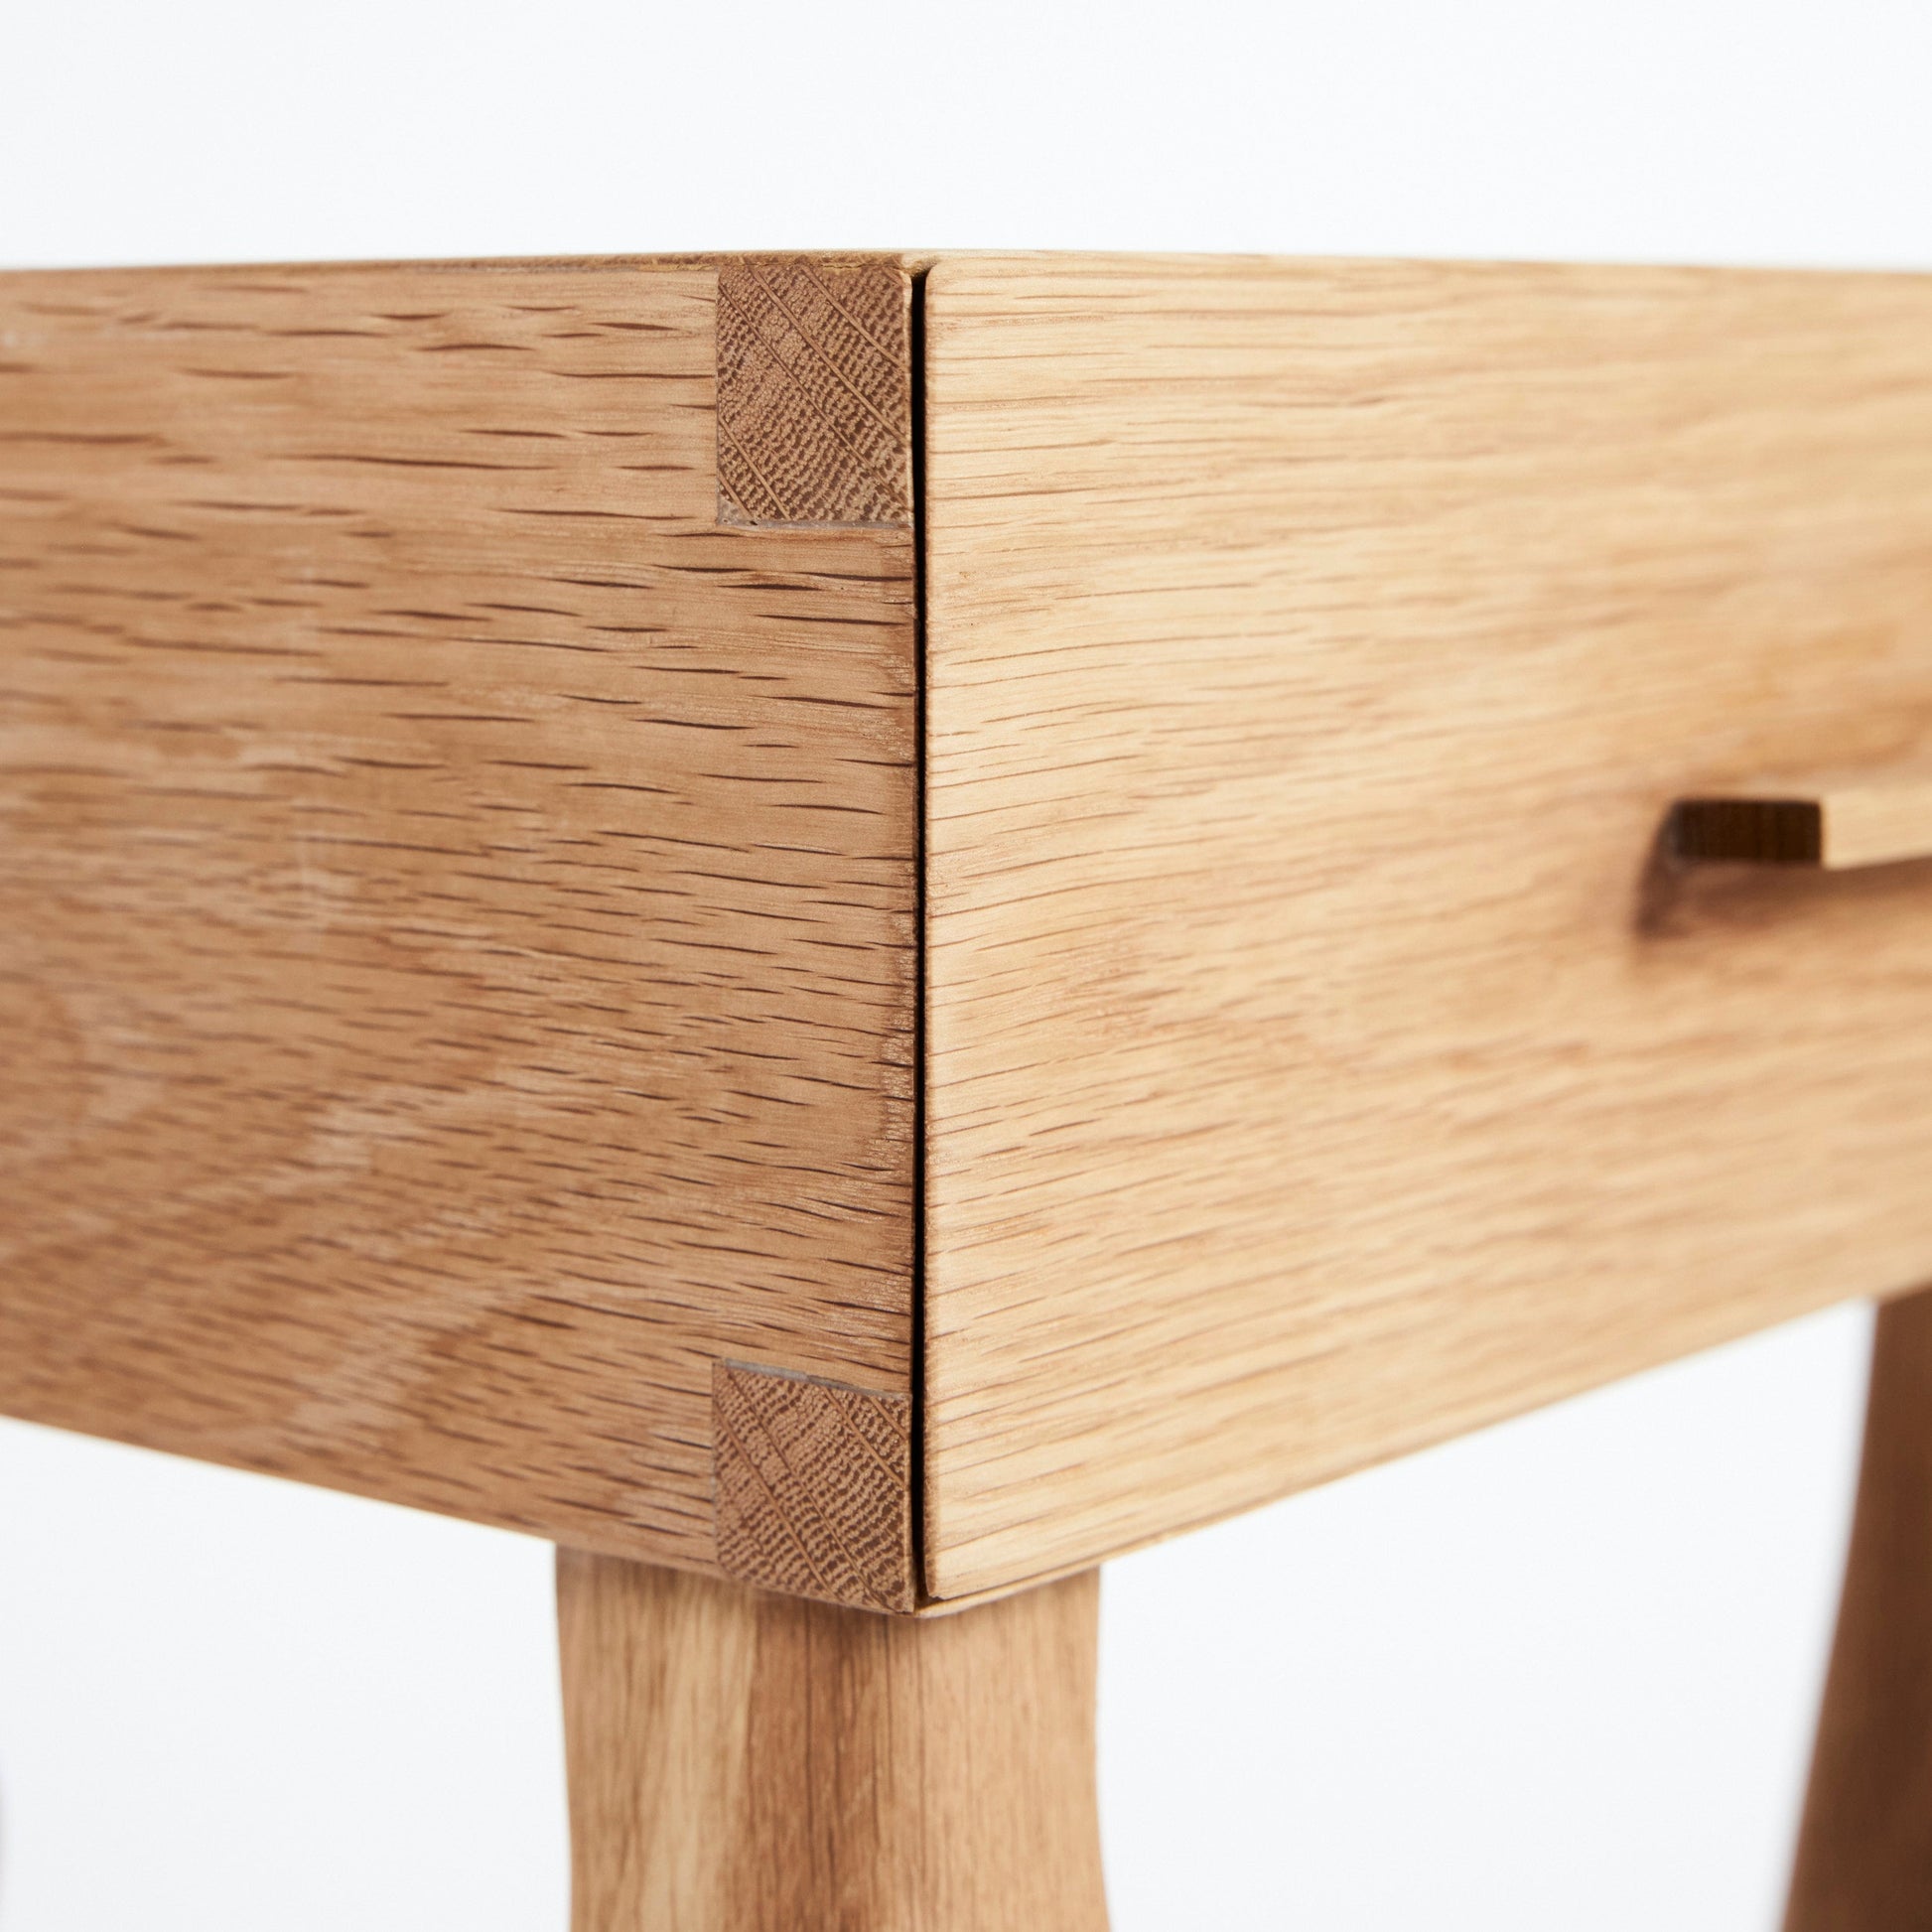 Side Table in Oak - No Foot End Tables